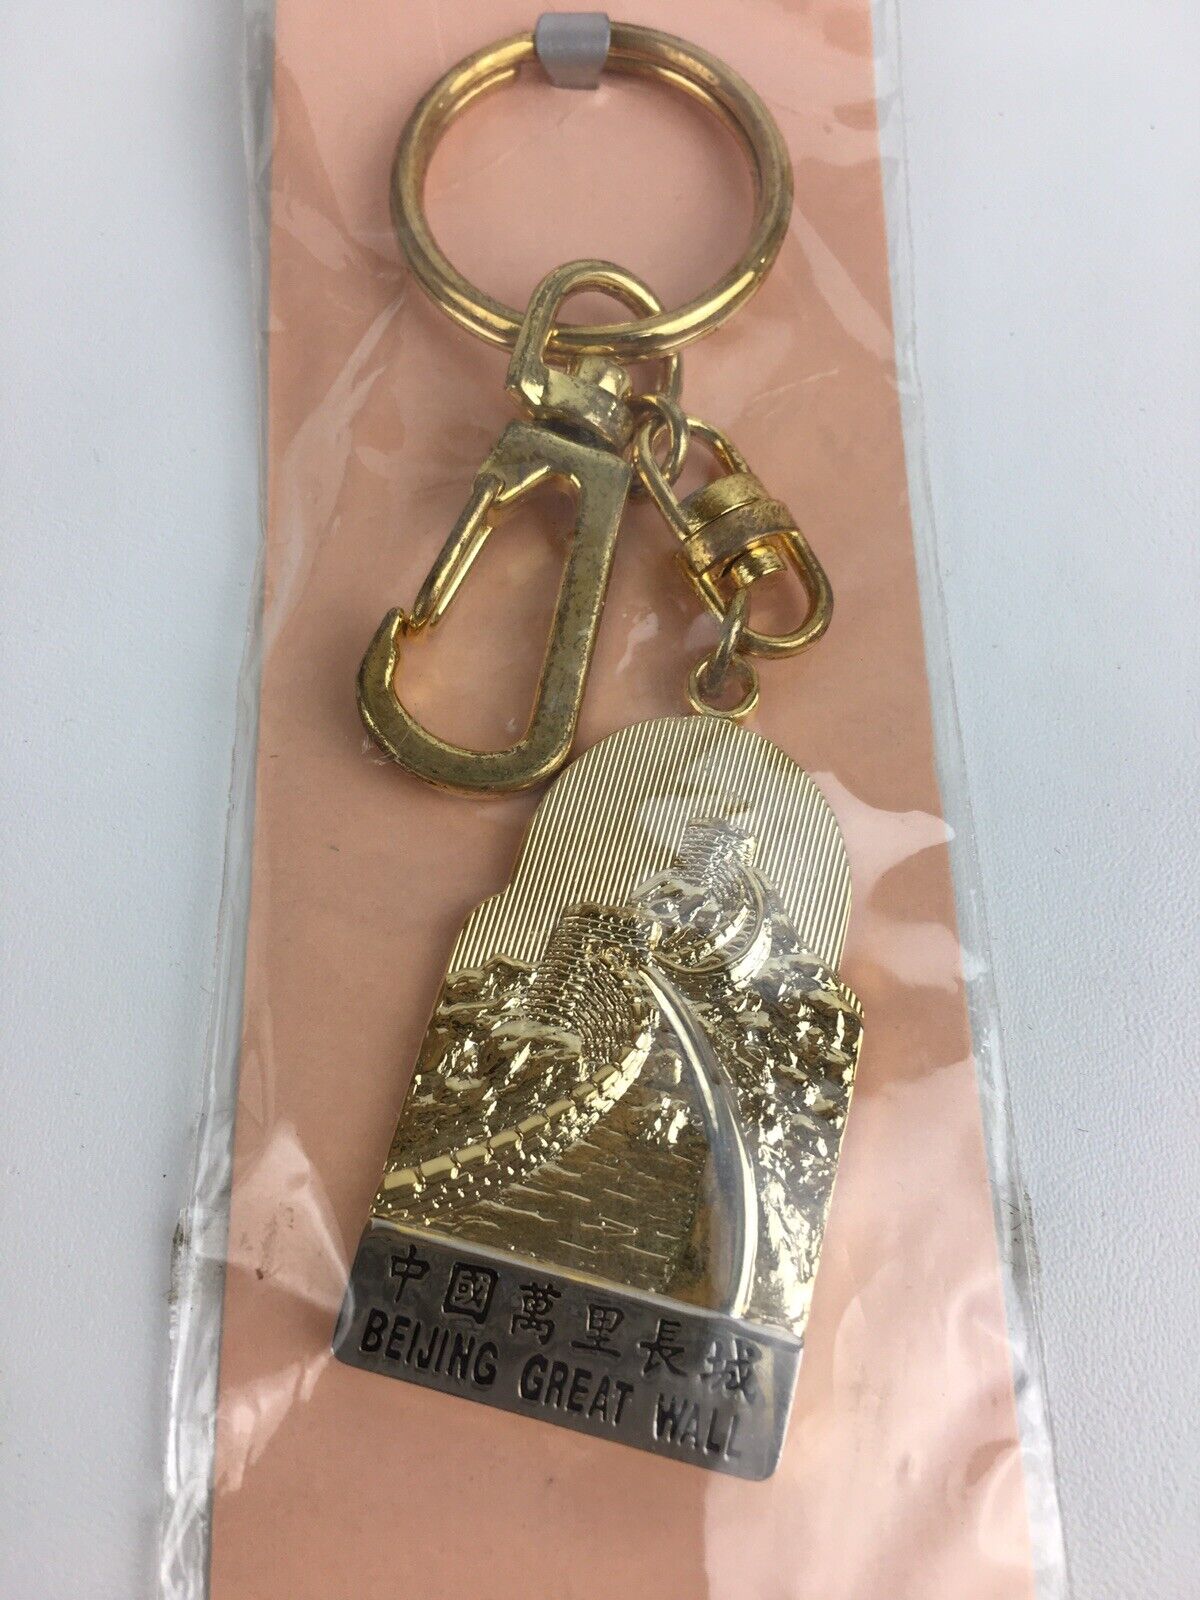 Beijing Great Wall Of China Keychain Vintage New Old Stock 1990’s